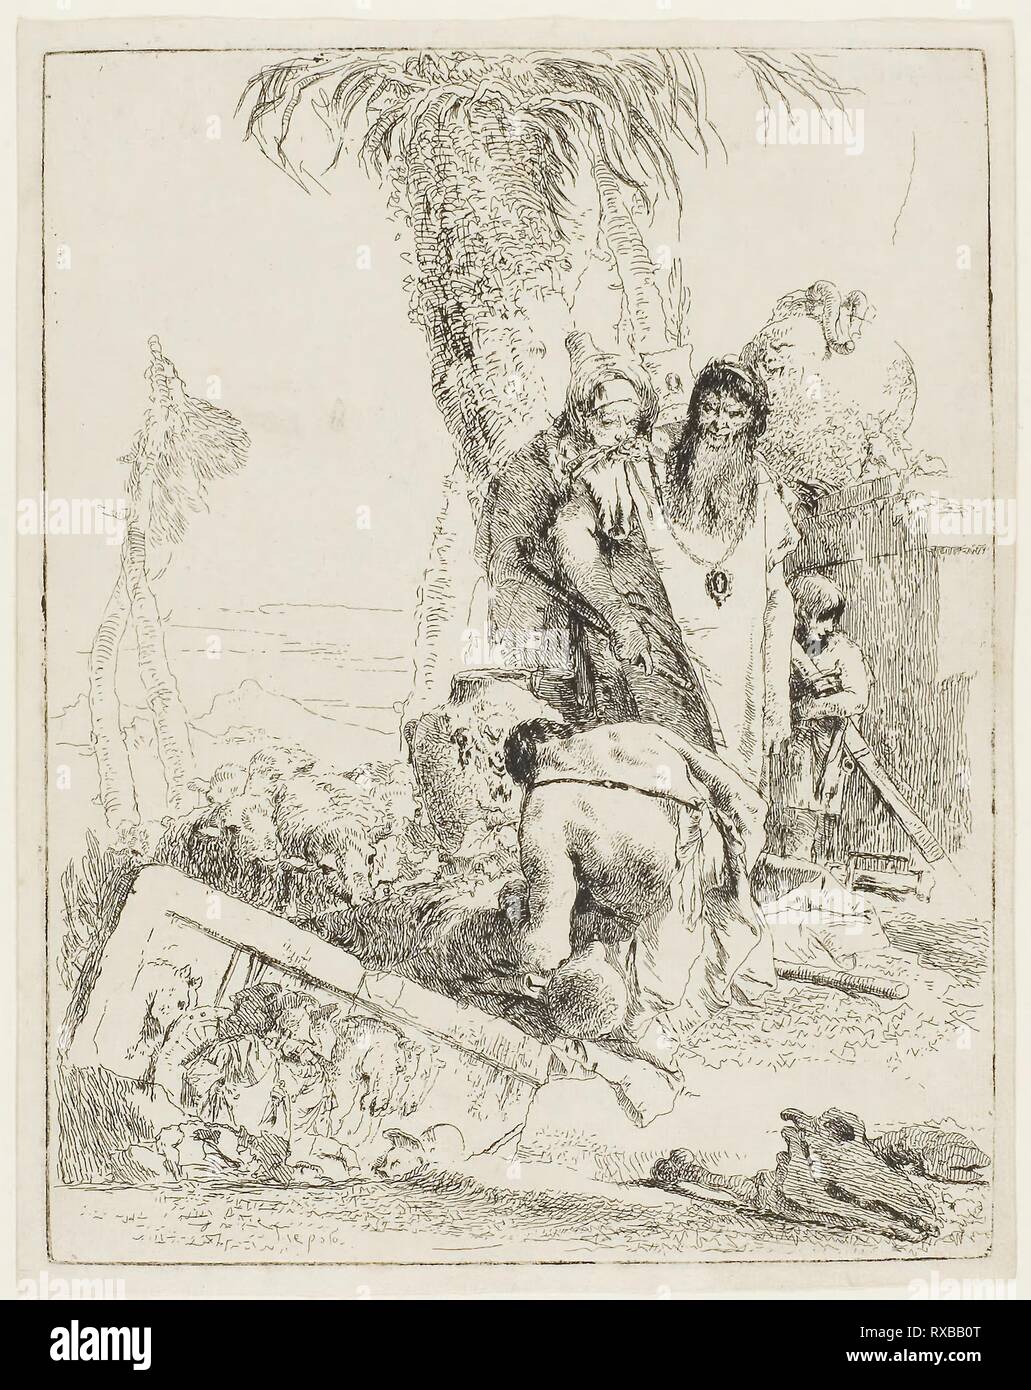 A Shepherd with Two Magicians, from Scherzi. Giambattista Tiepolo; Italian, 1696-1770. Date: 1735-1740. Dimensions: 222 x 174 mm (plate); 230 x 184 mm (sheet). Etching on paper. Origin: Italy. Museum: The Chicago Art Institute. Stock Photo